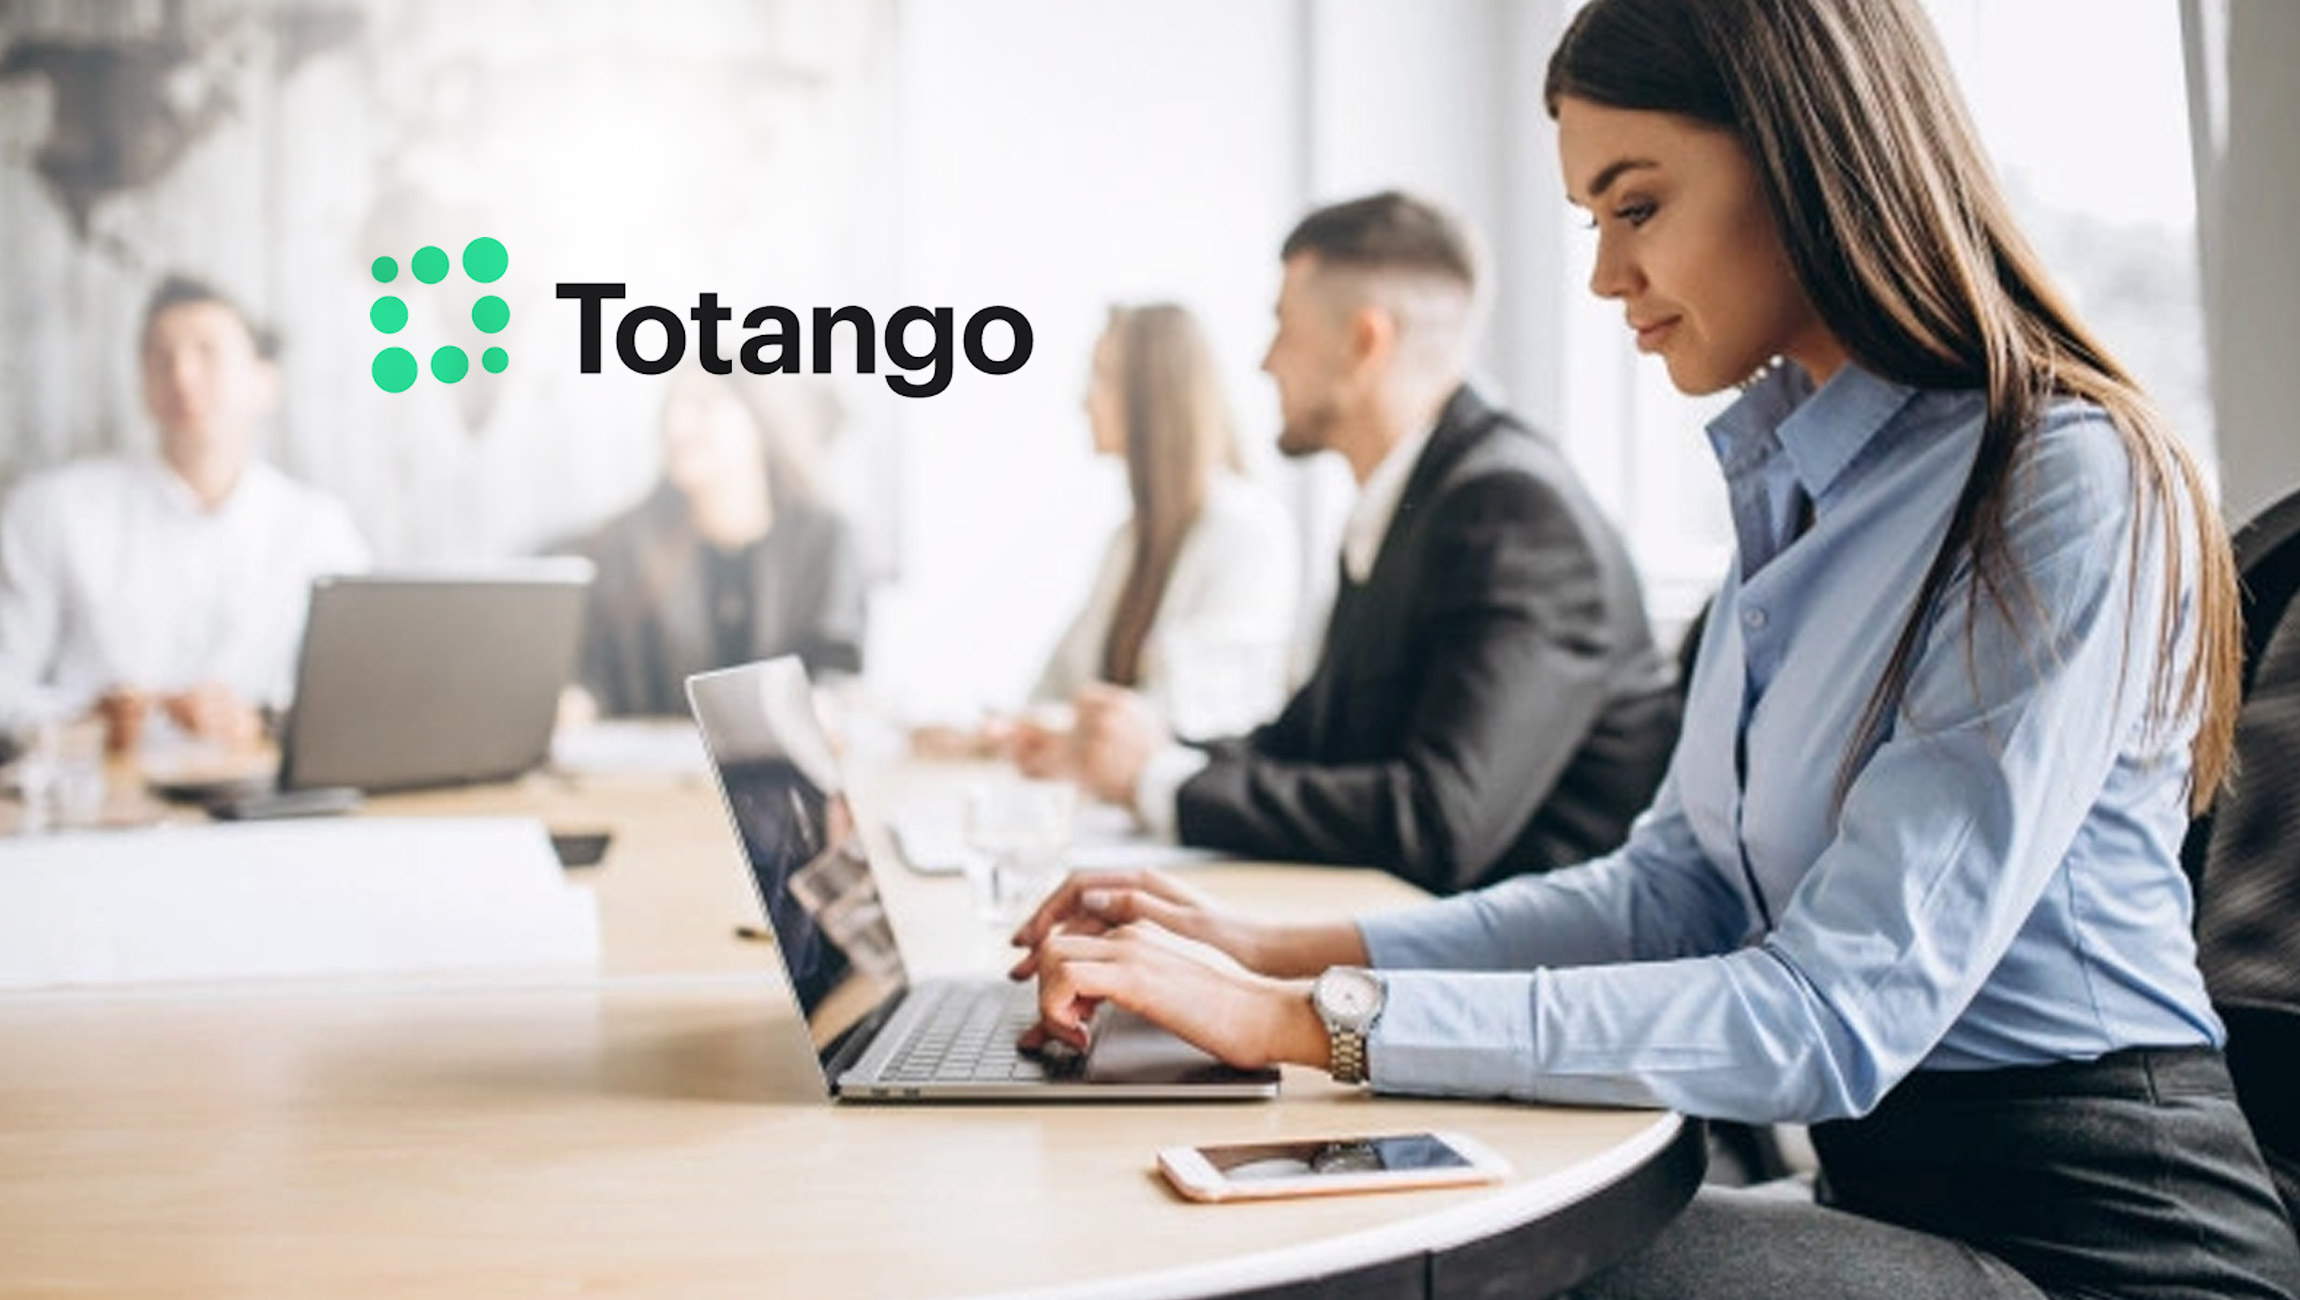 Totango to Inspire Teams and Individual Leaders at Customer Success Summit Event